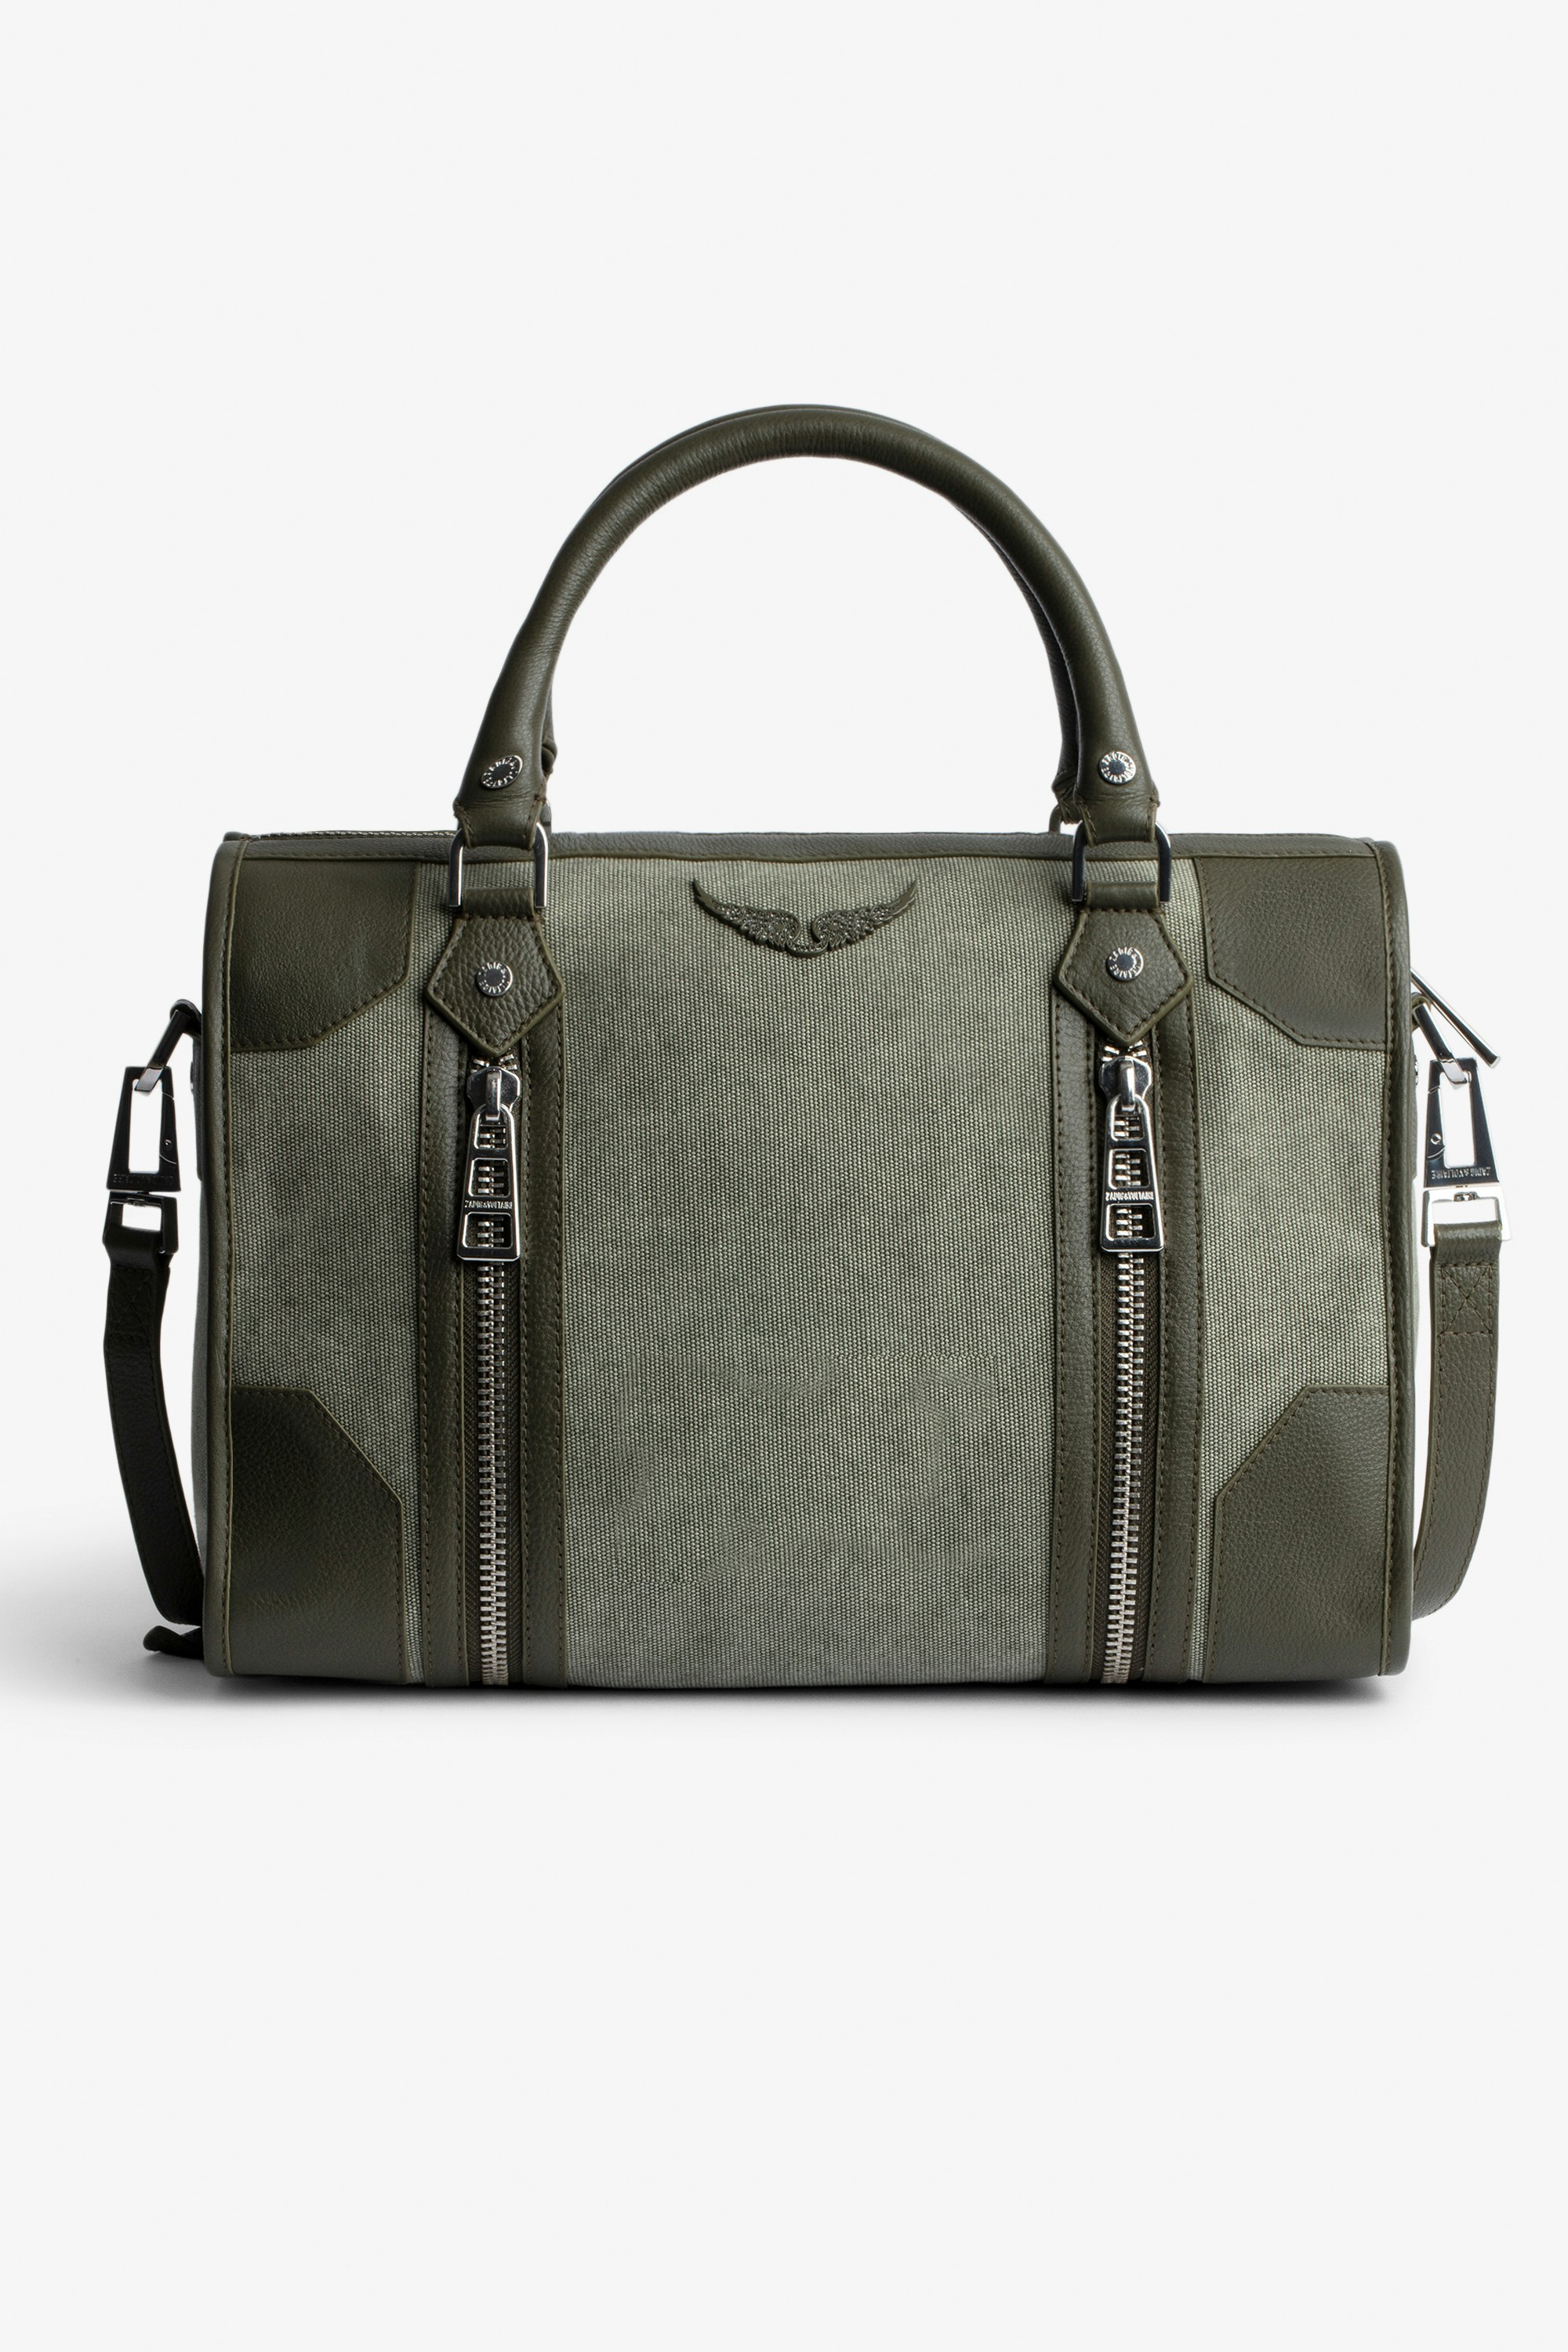 Sunny Medium #2 Bag Women's Voltaire bag in khaki cotton canvas and leather with handle and shoulder strap